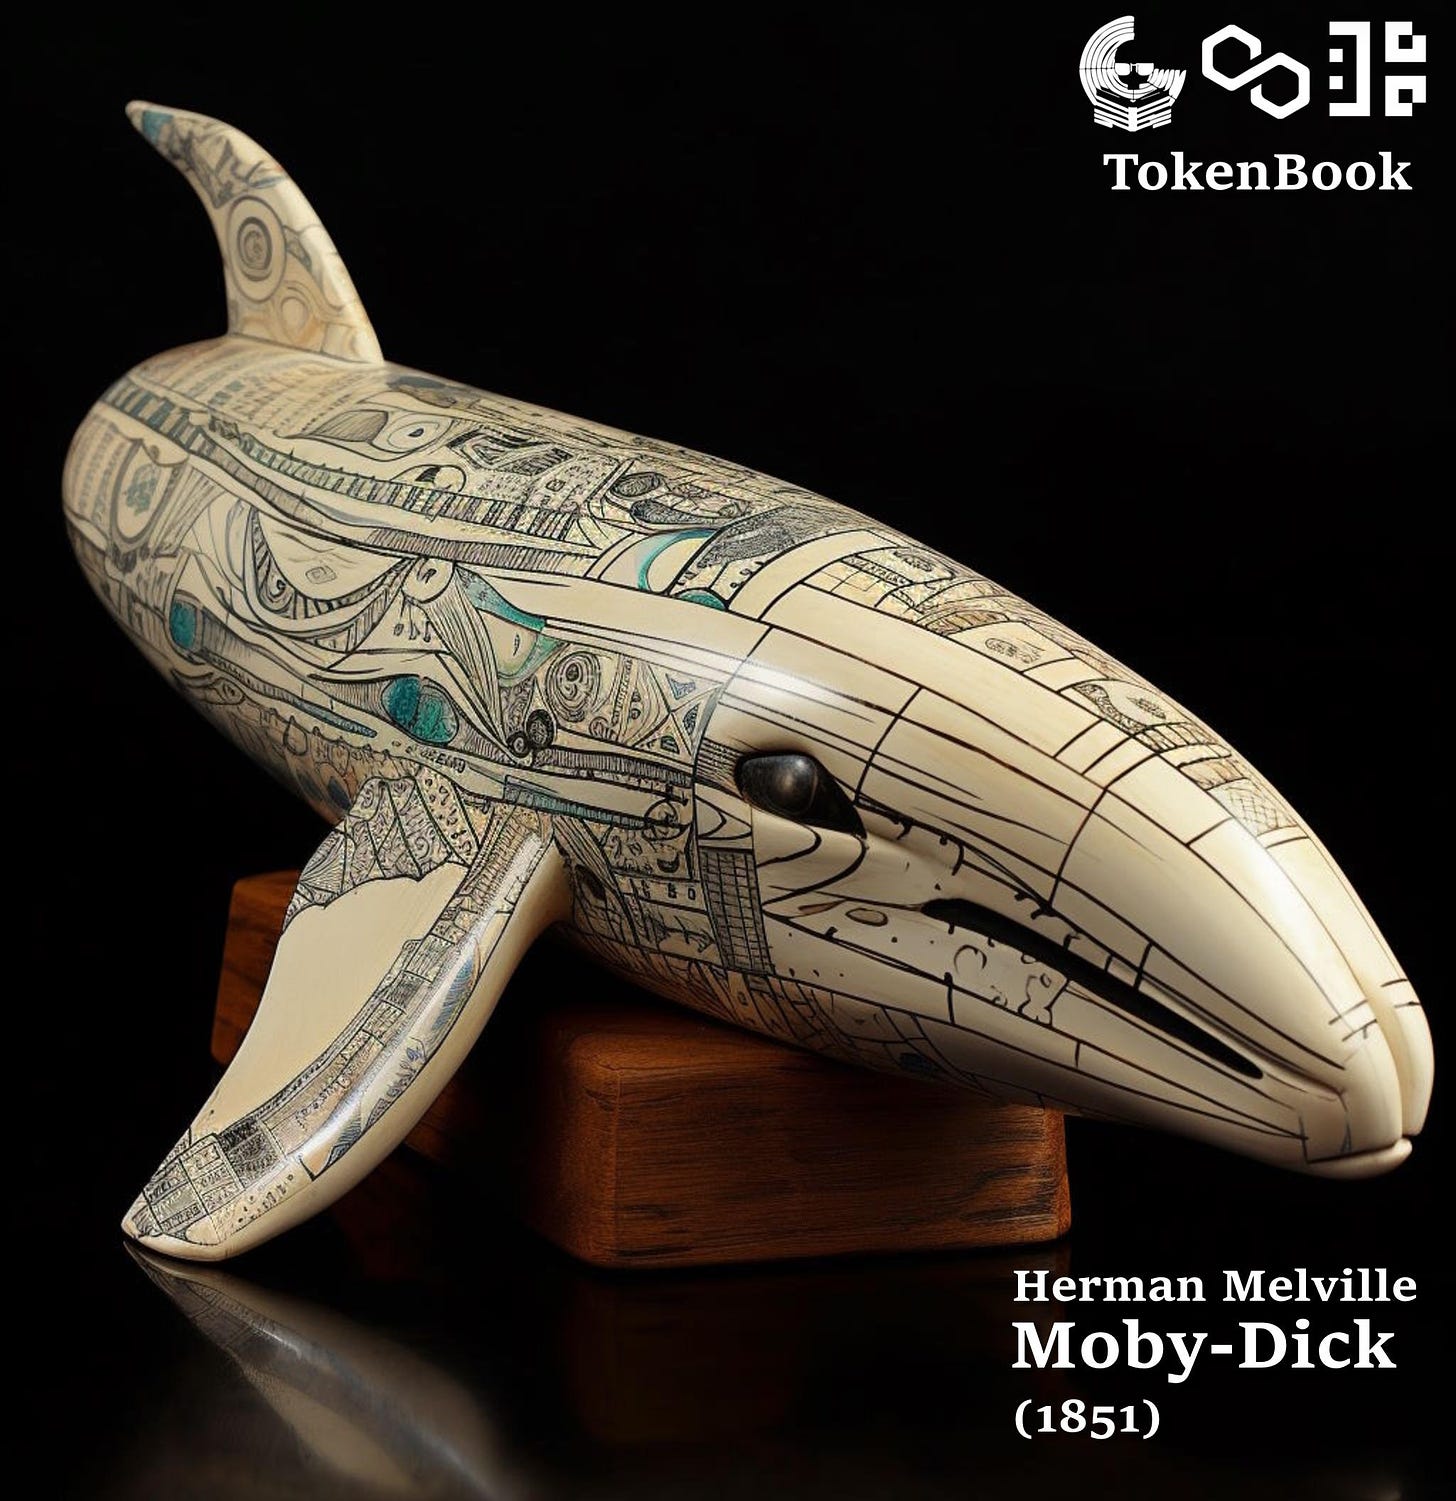 TokenBook cover for Moby-Dick by Herman Melville